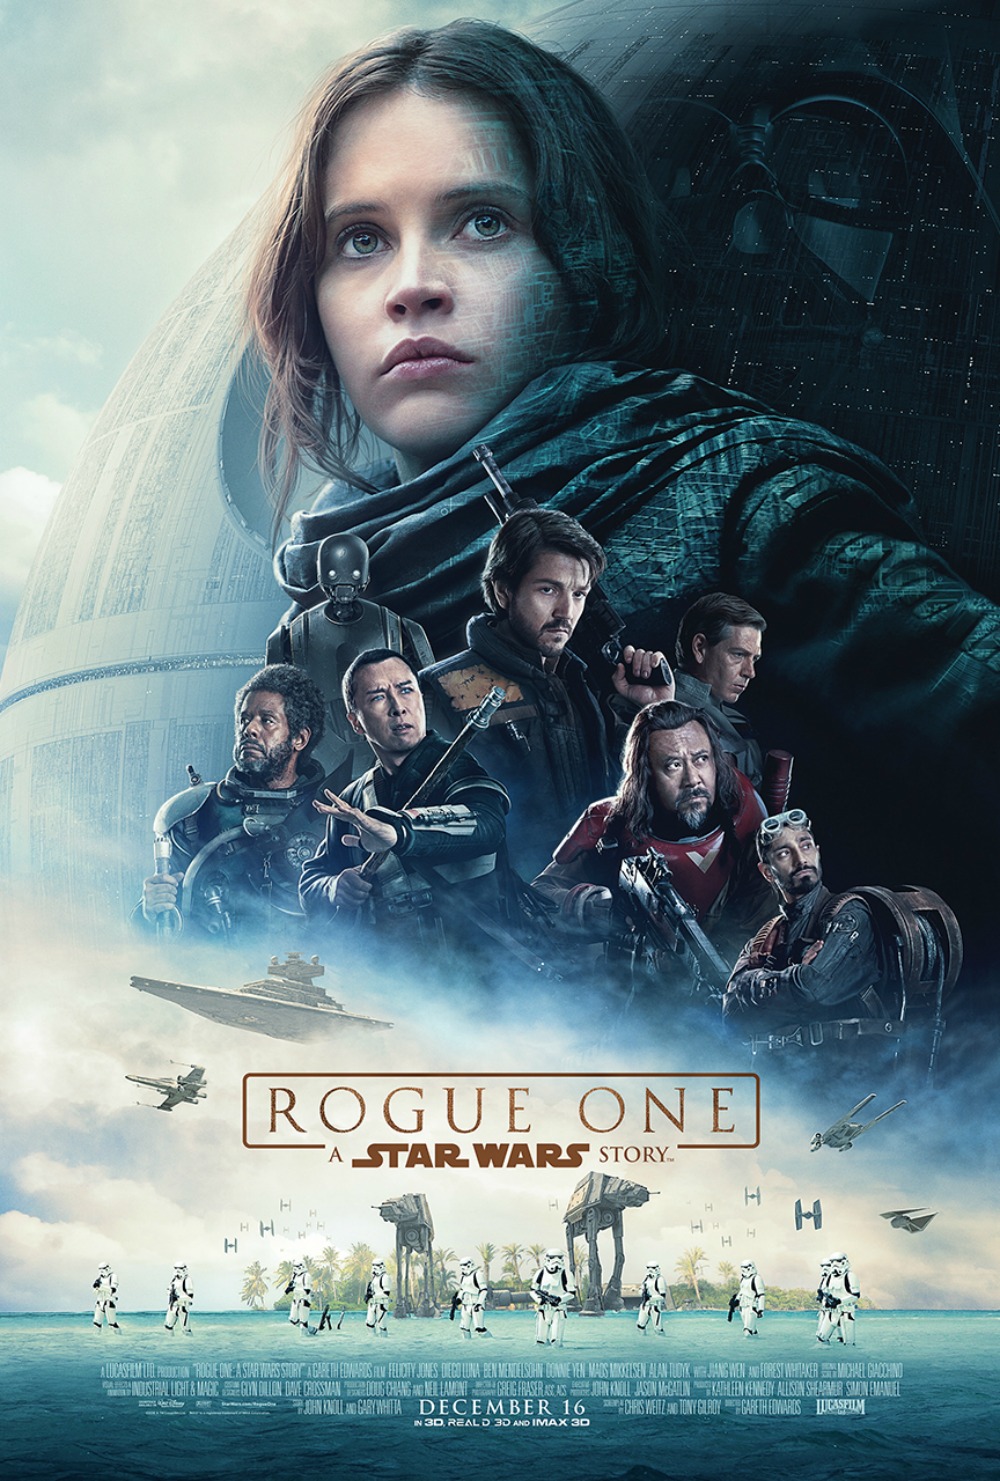 Rogue One: A Star Wars Story Trailer #RogueOne